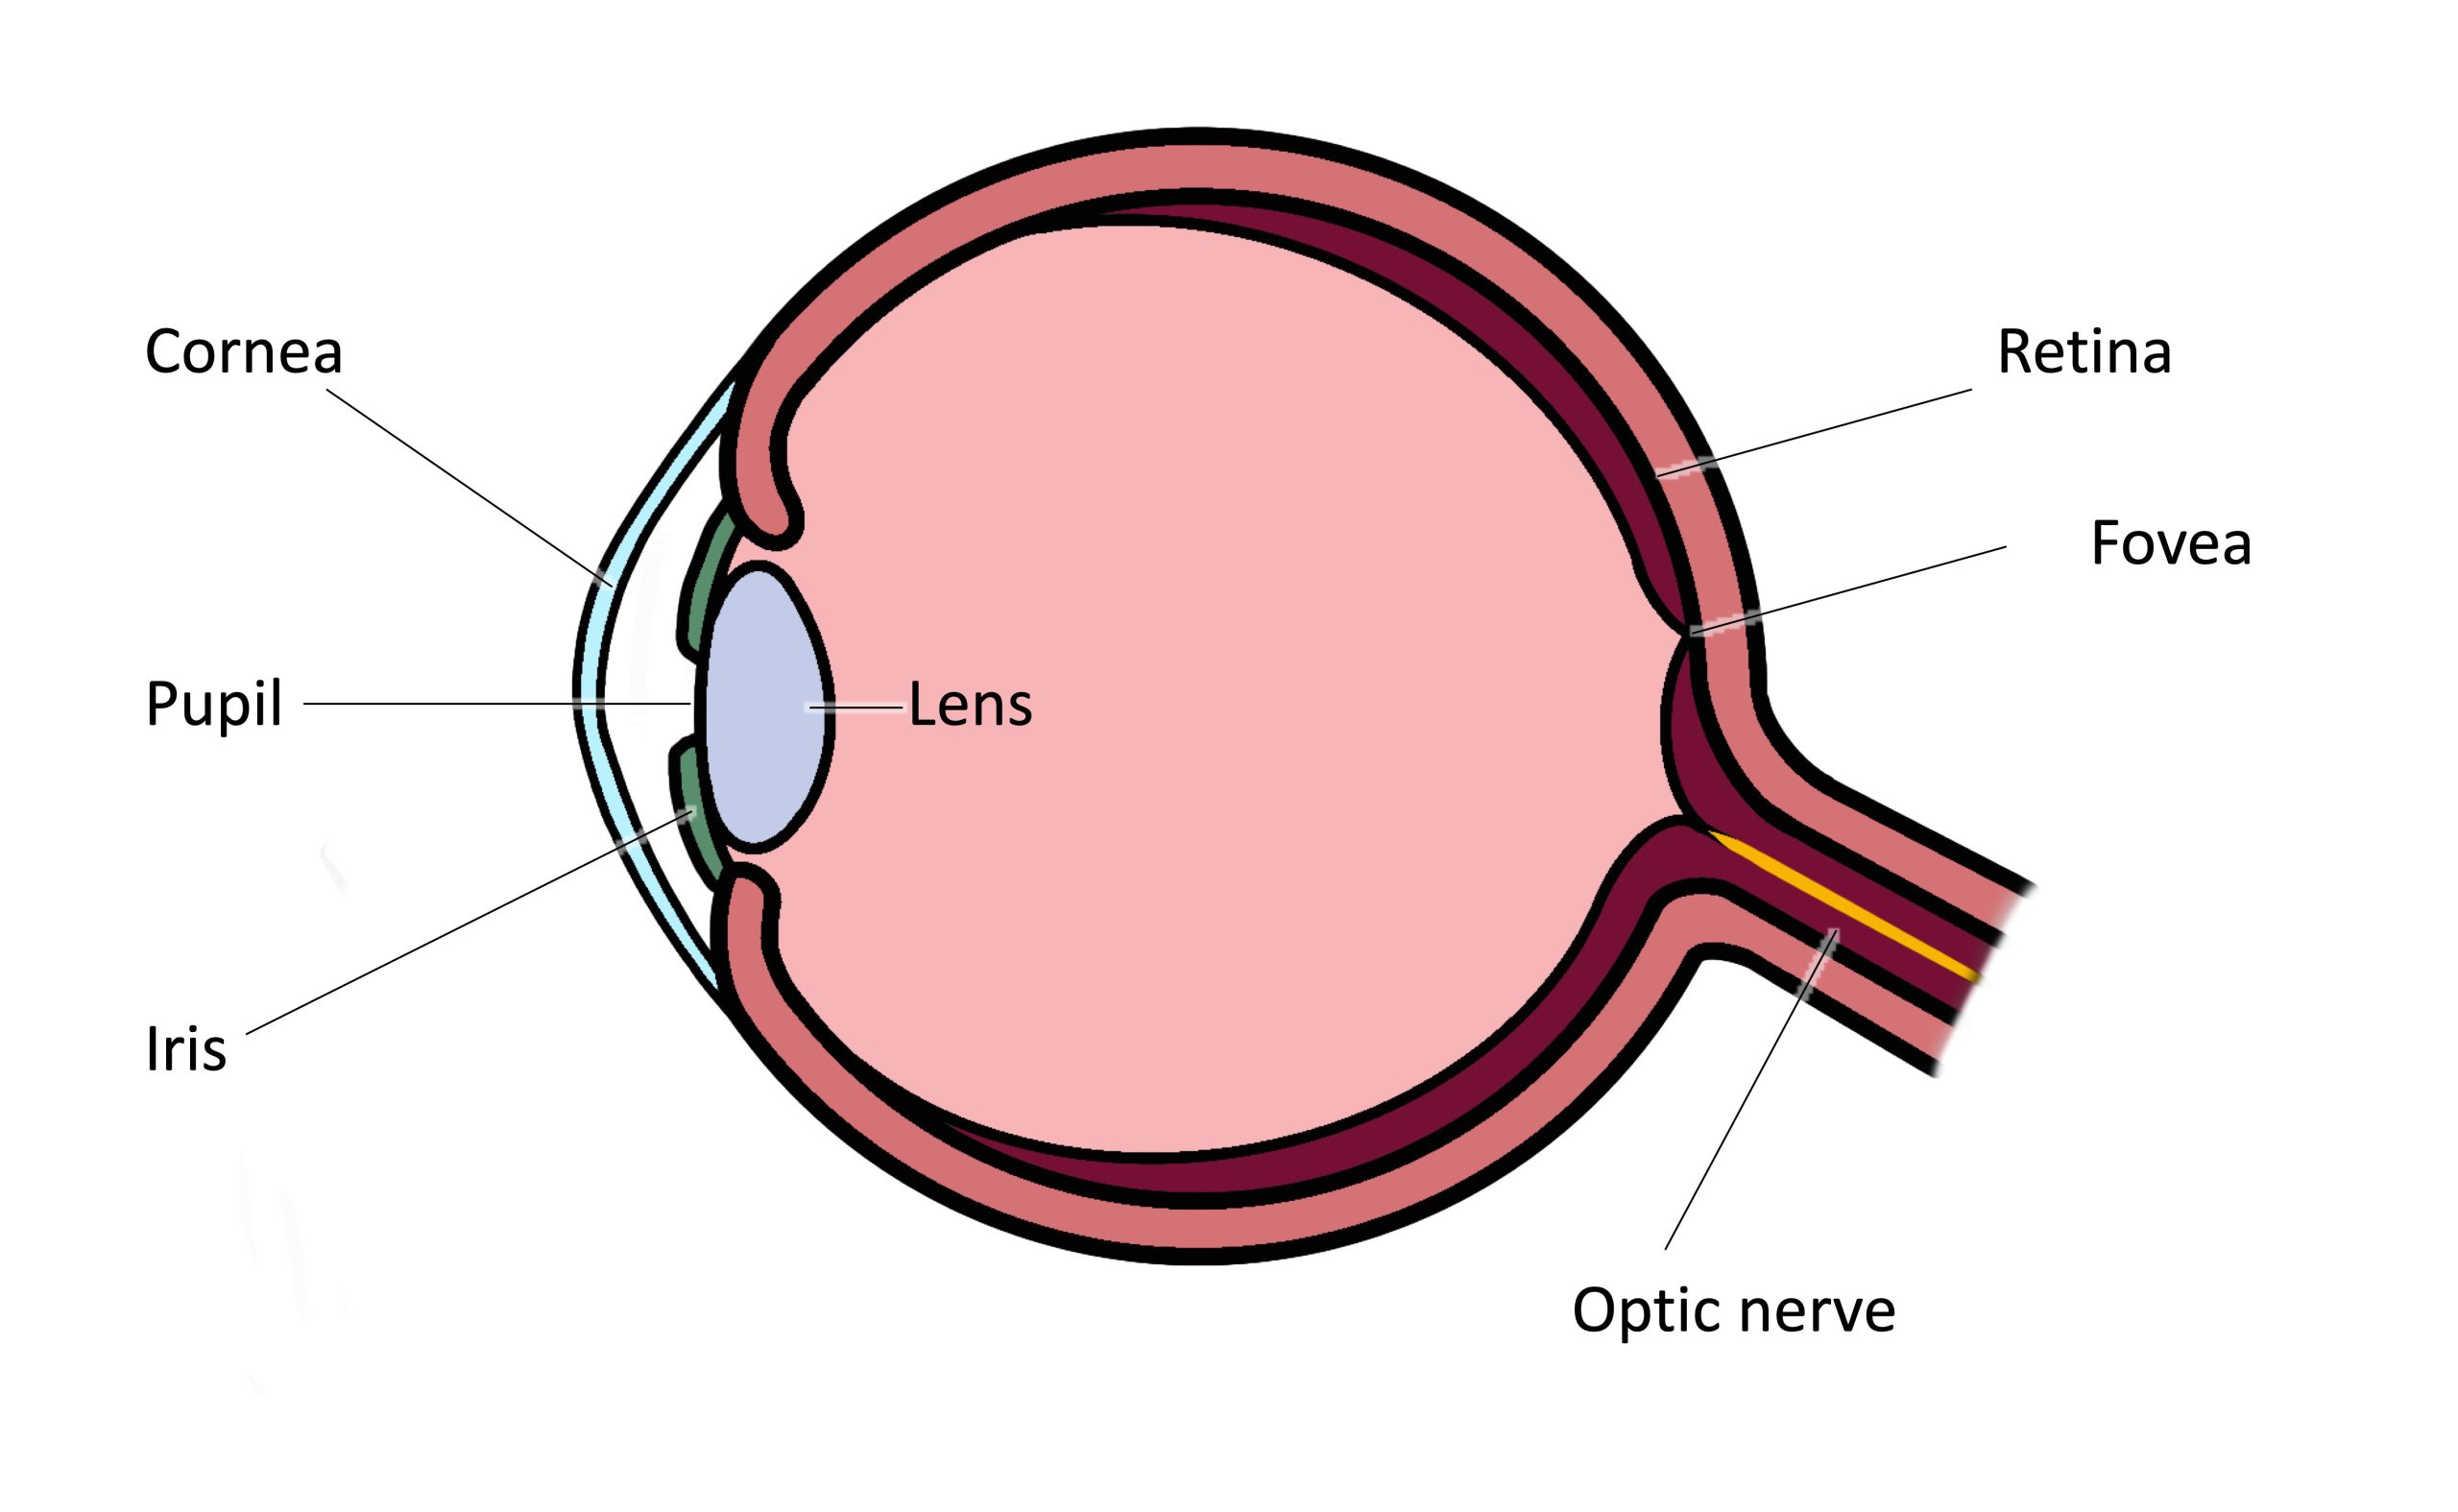 Different parts of the eye are labeled in this illustration. The cornea, pupil, iris, and lens are situated toward the front of the eye, and at the back are the optic nerve, fovea, and retina.